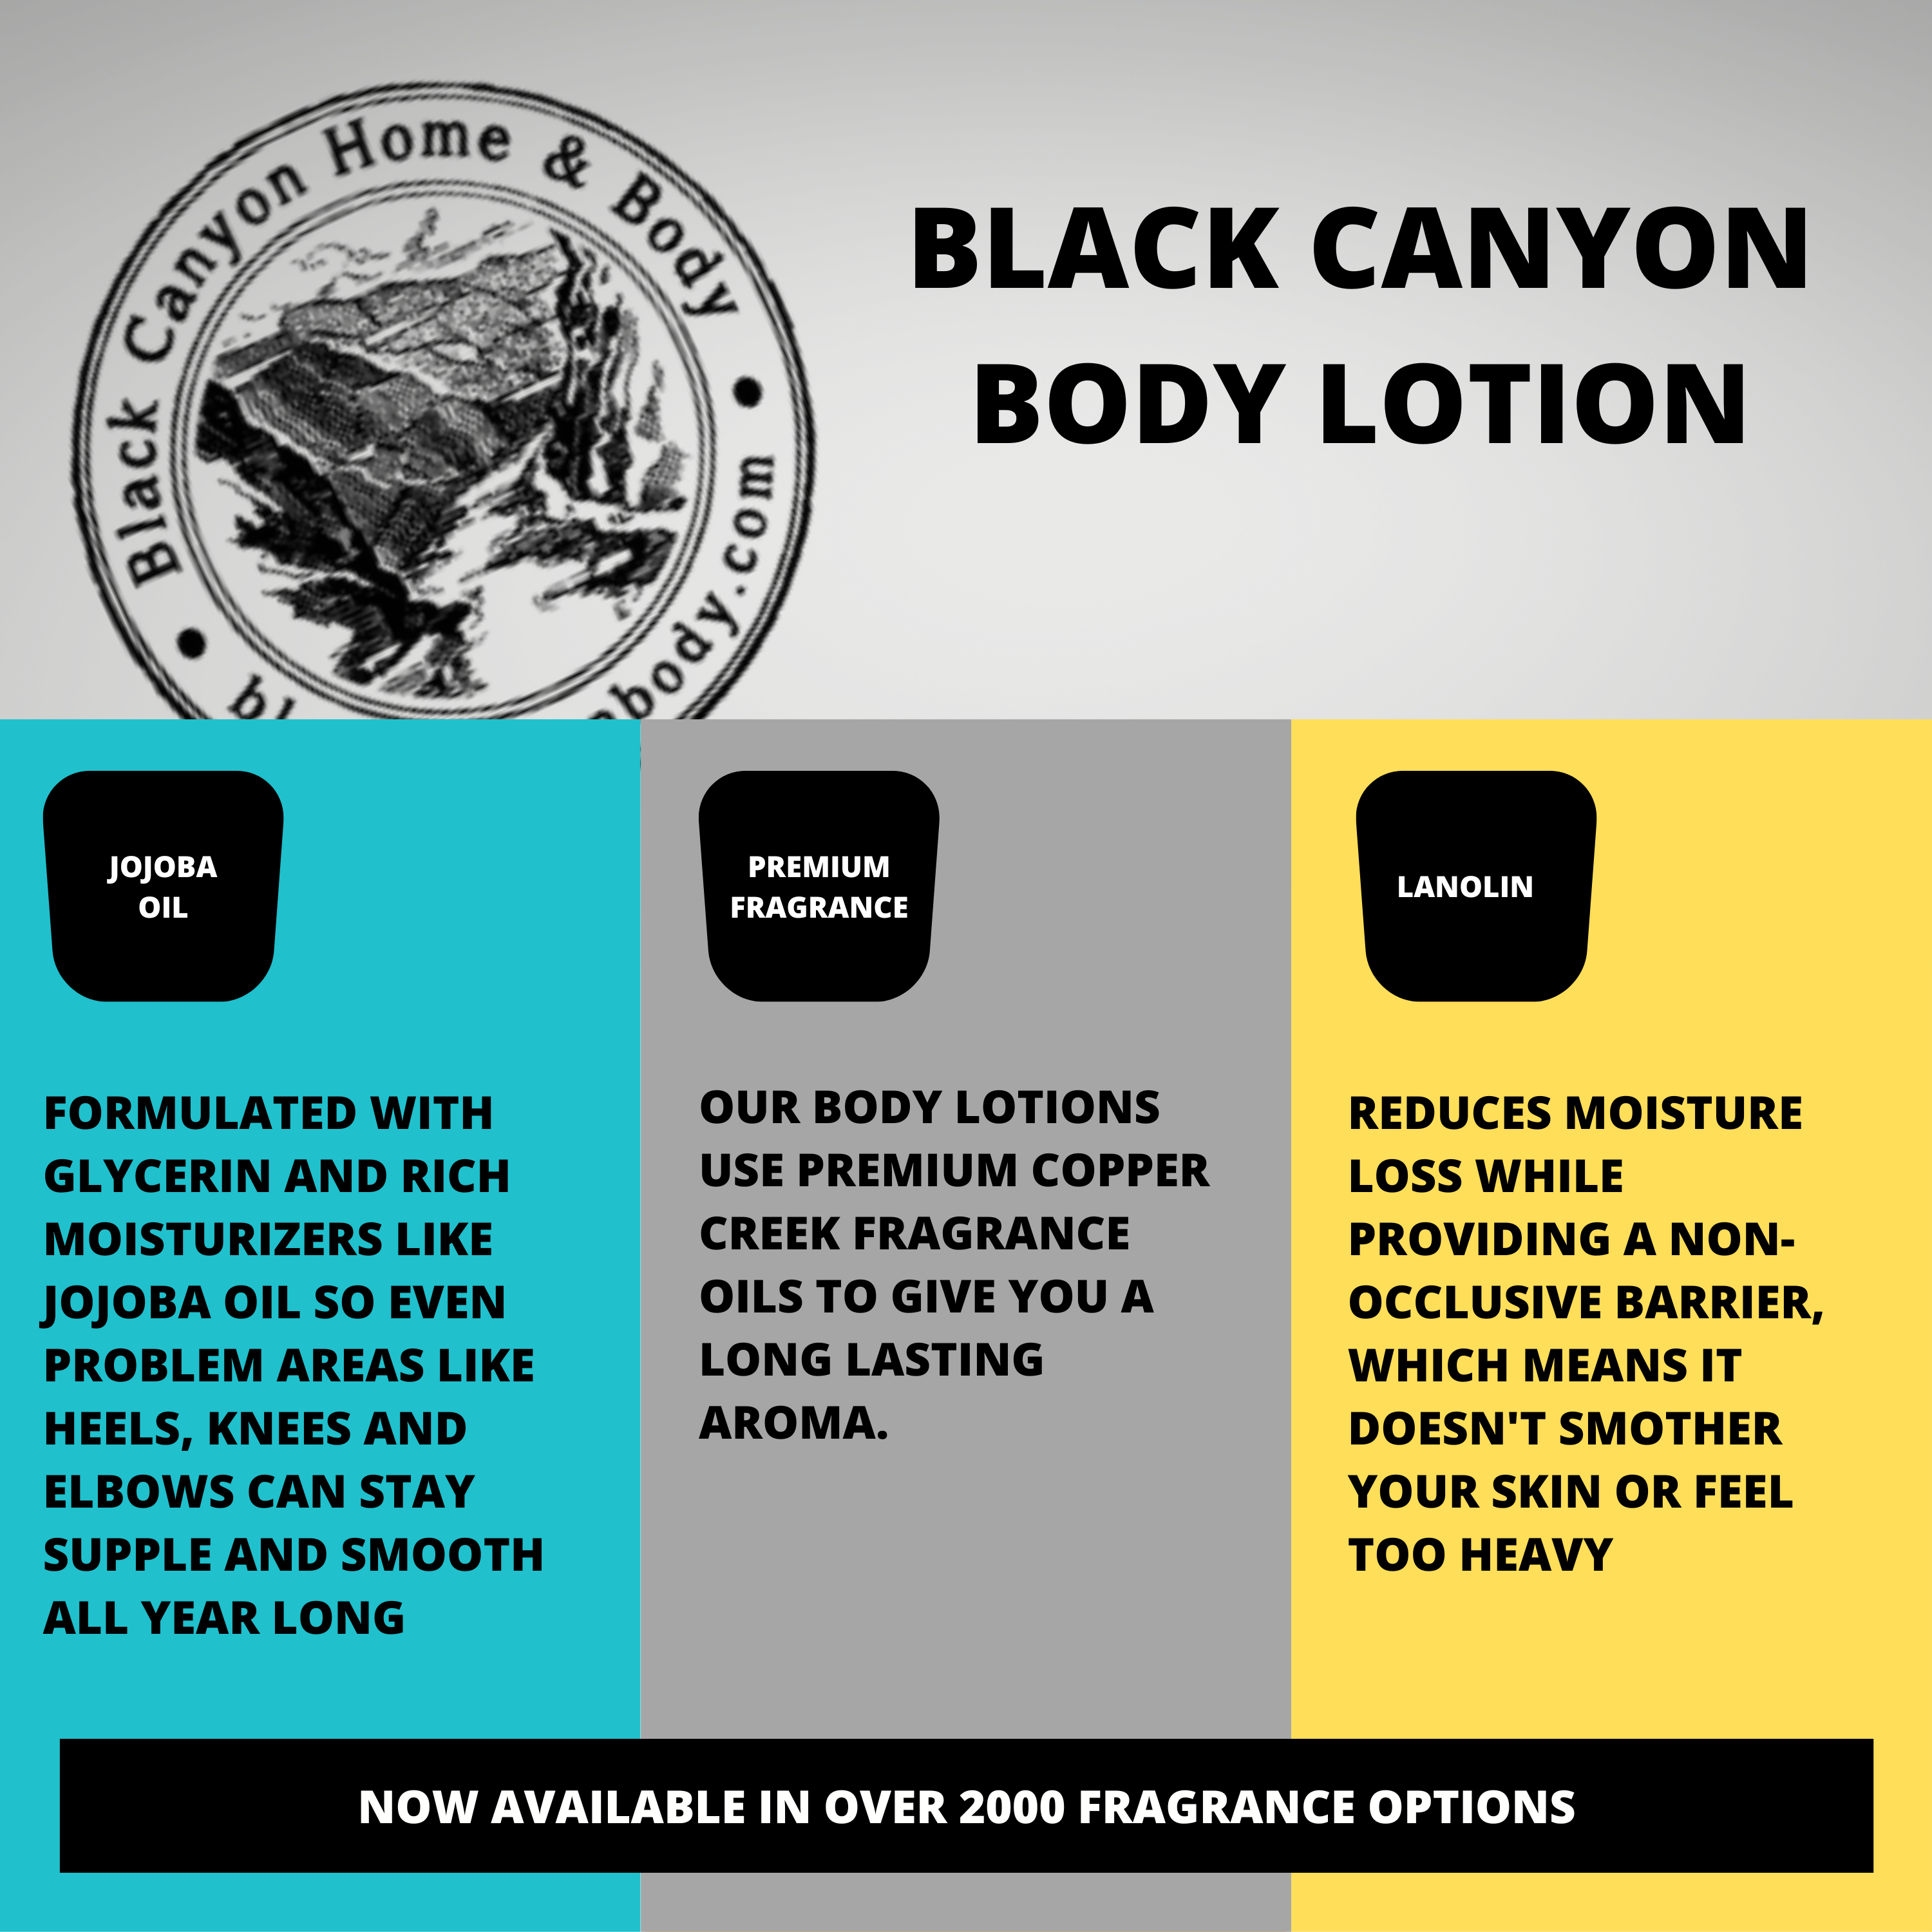 Black Canyon Berry Frost Scented Luxury Body Lotion with Lanolin and Jojoba Oil